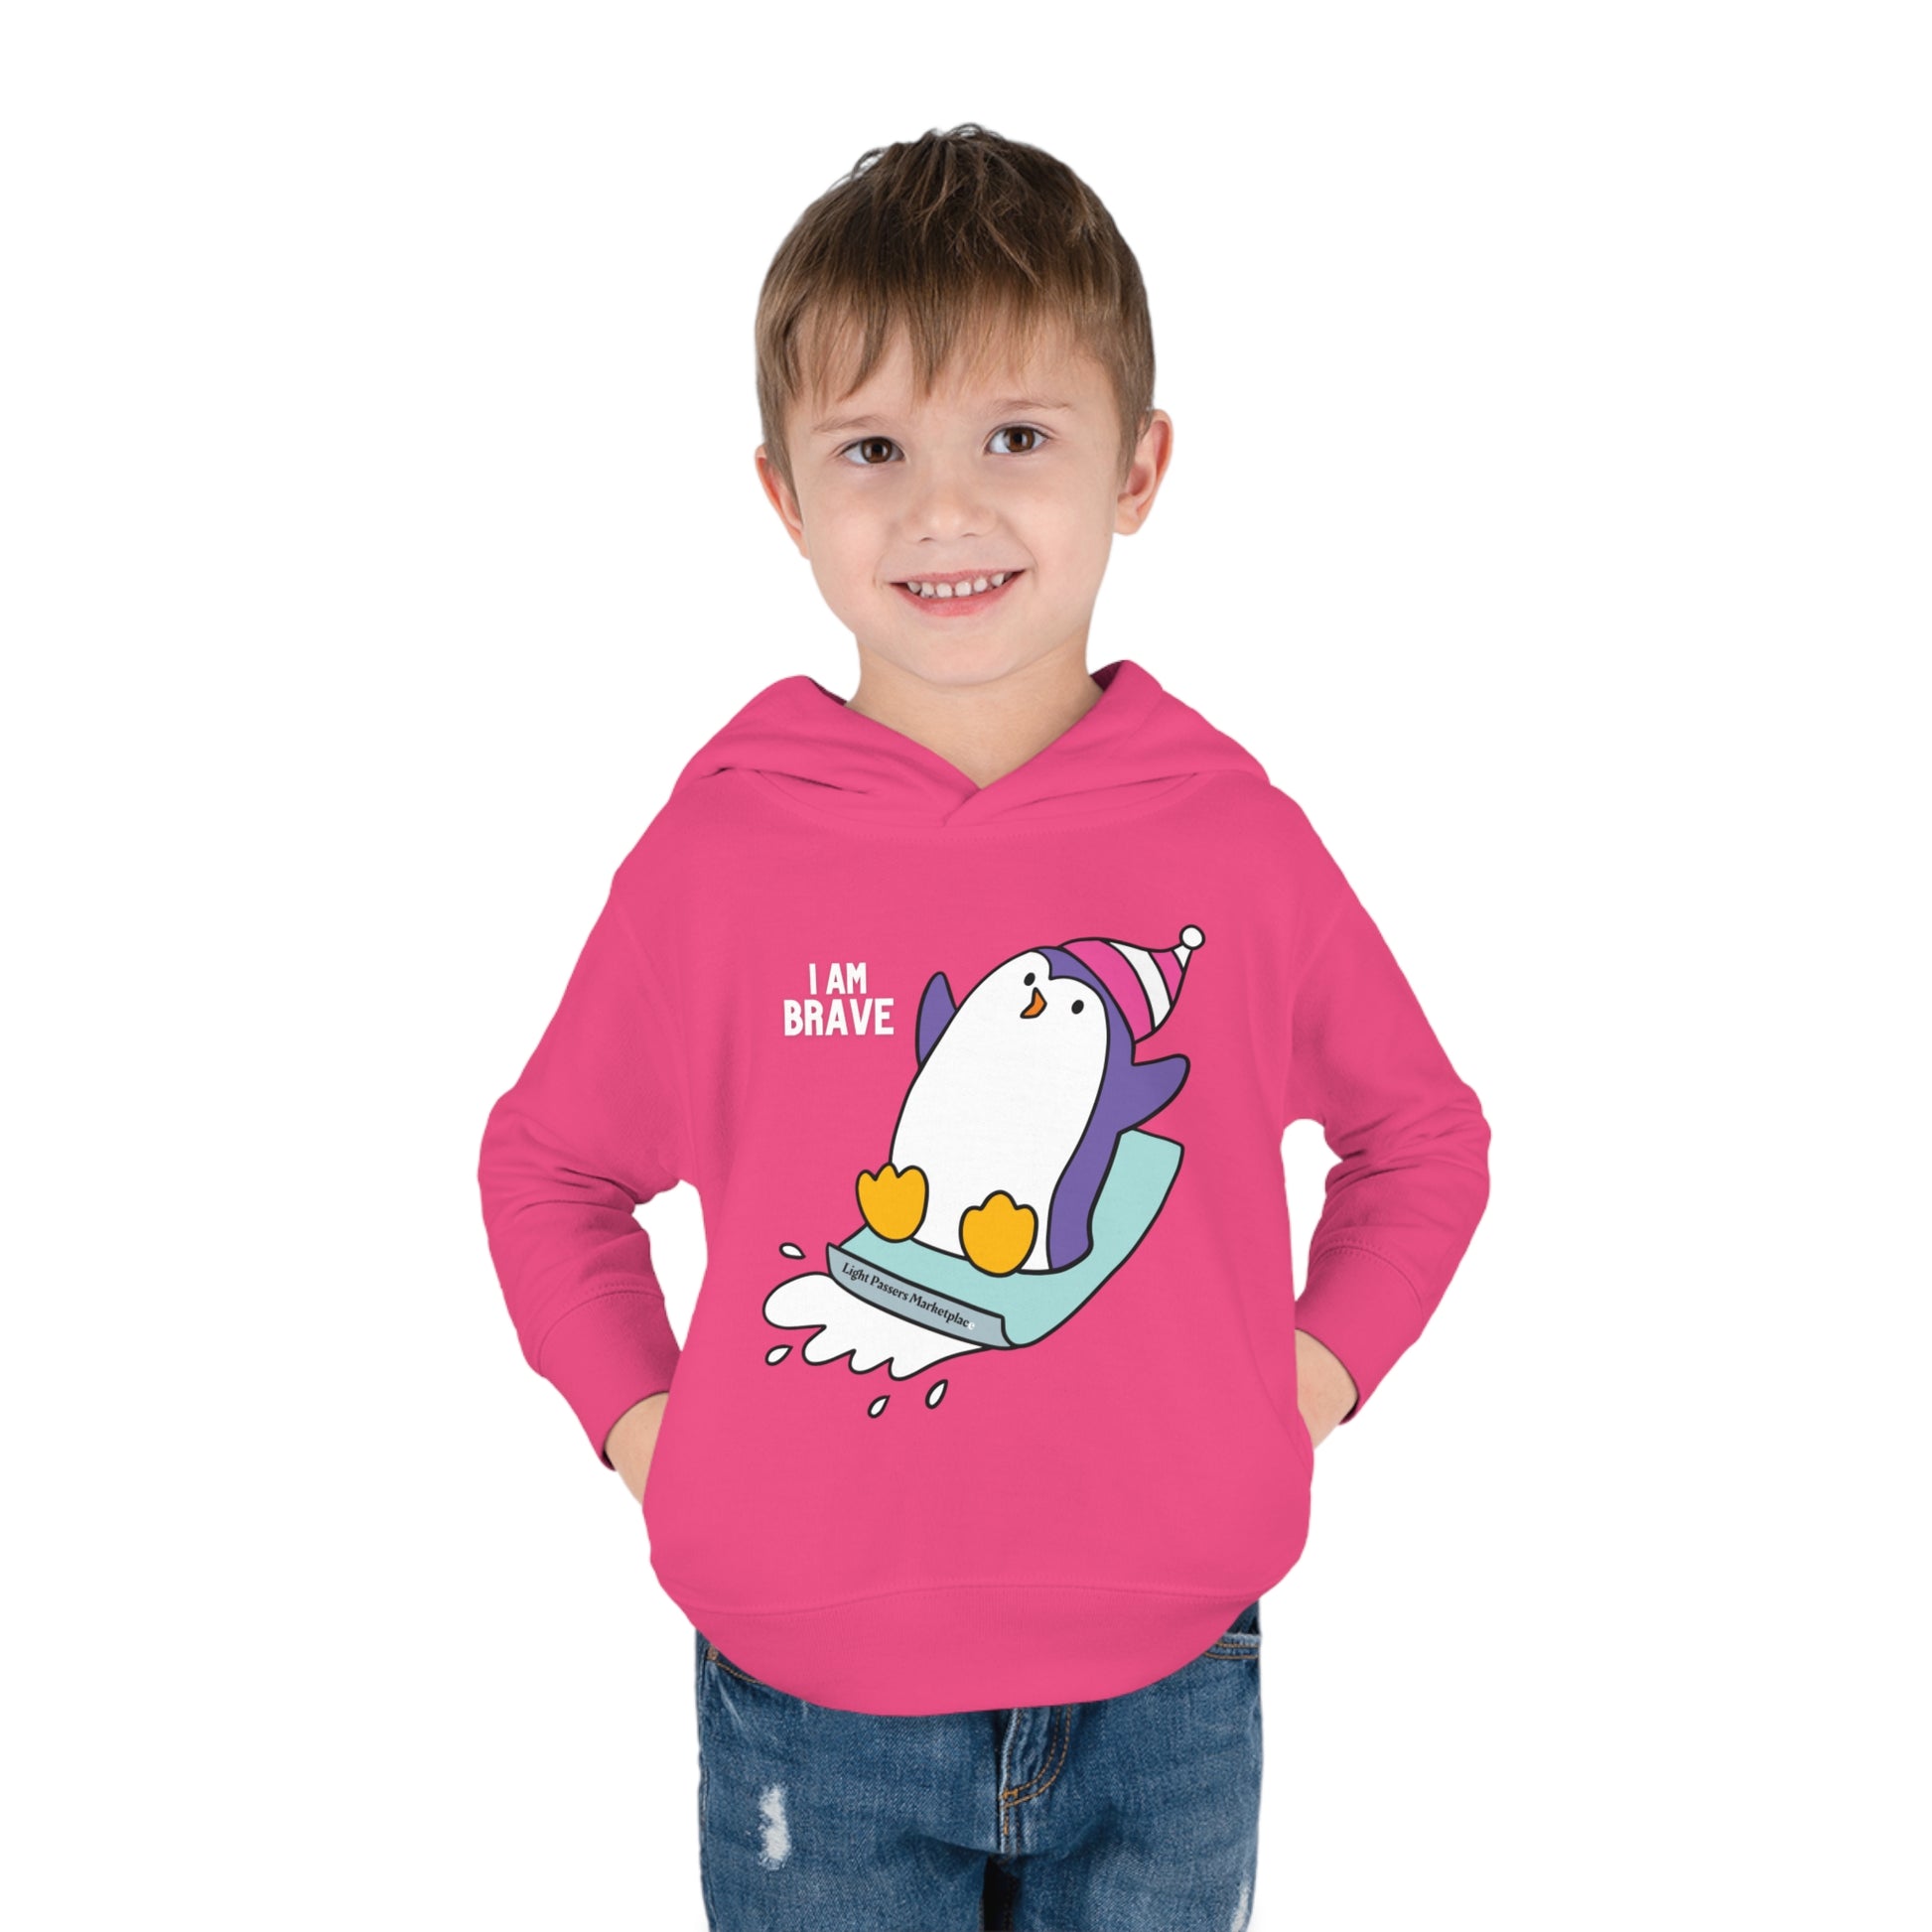 A toddler in a pink hoodie with a penguin design, showcasing cover-stitched details and side seam pockets for durability and comfort.